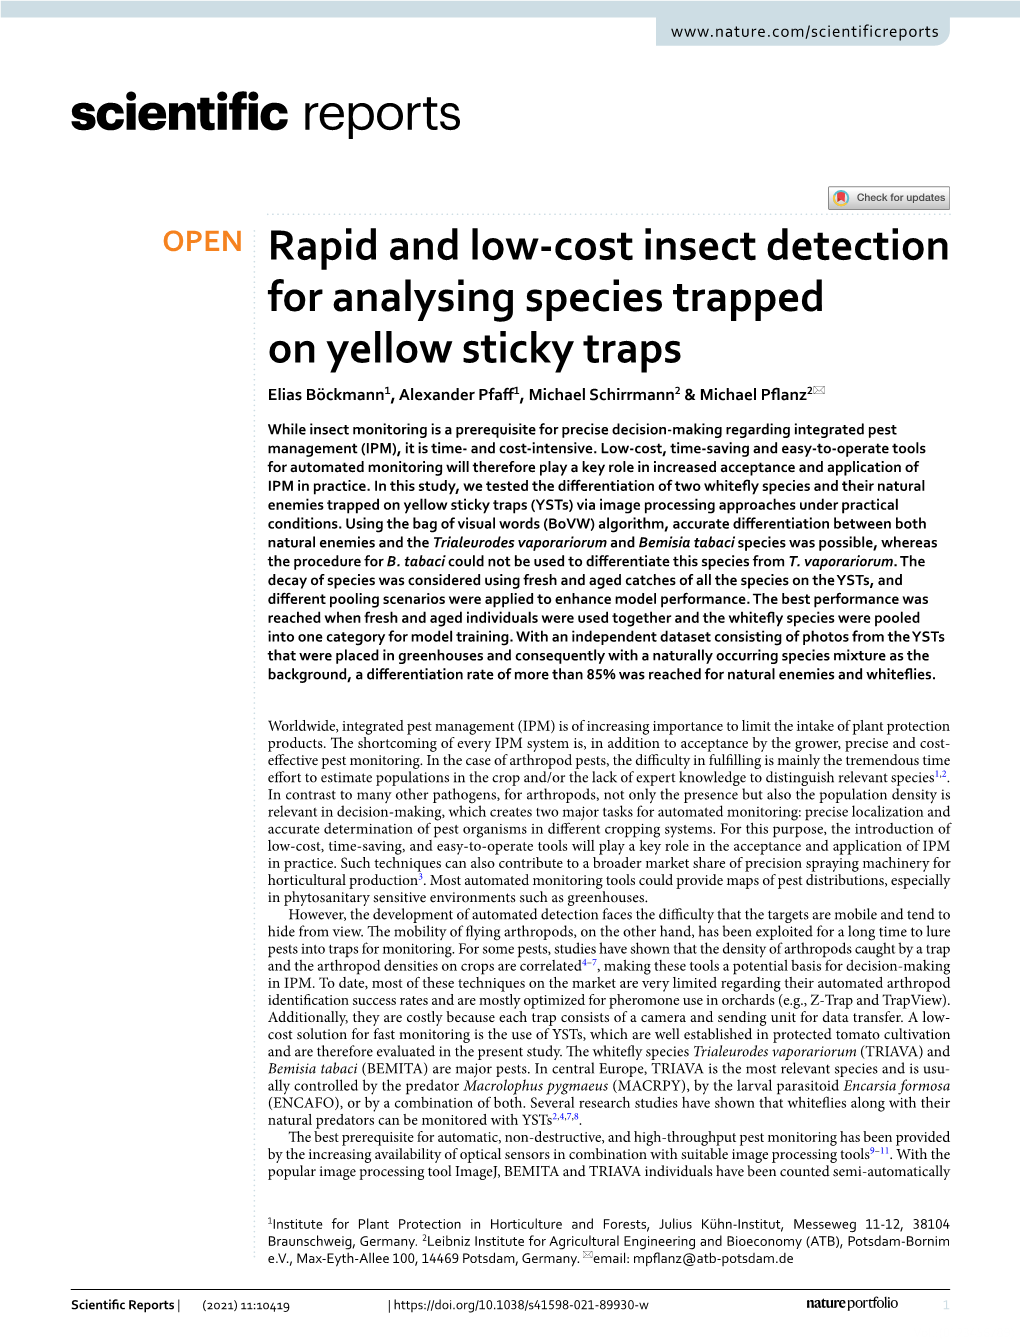 Rapid and Low-Cost Insect Detection for Analysing Species Trapped On